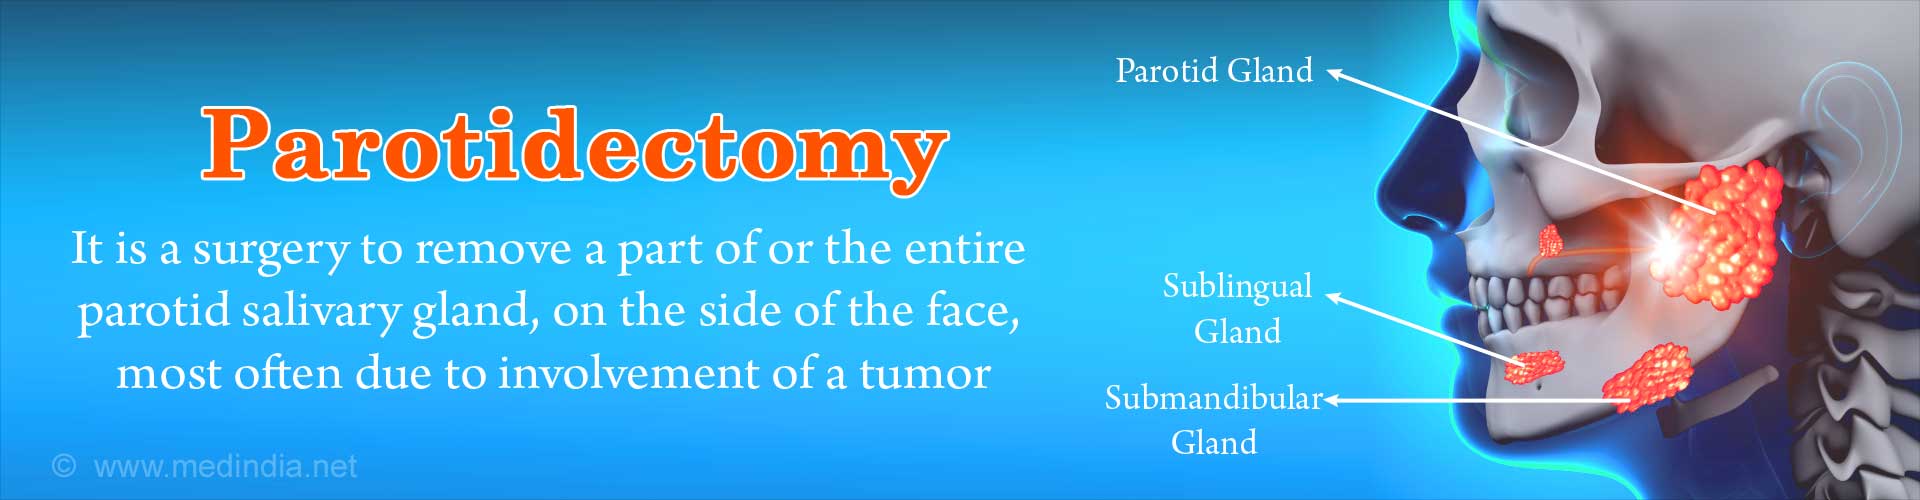 Parotidectomy is a surgery to remove a part of or the entire parotid salivary gland, on the side of the face, most often due to involvement by a tumor.